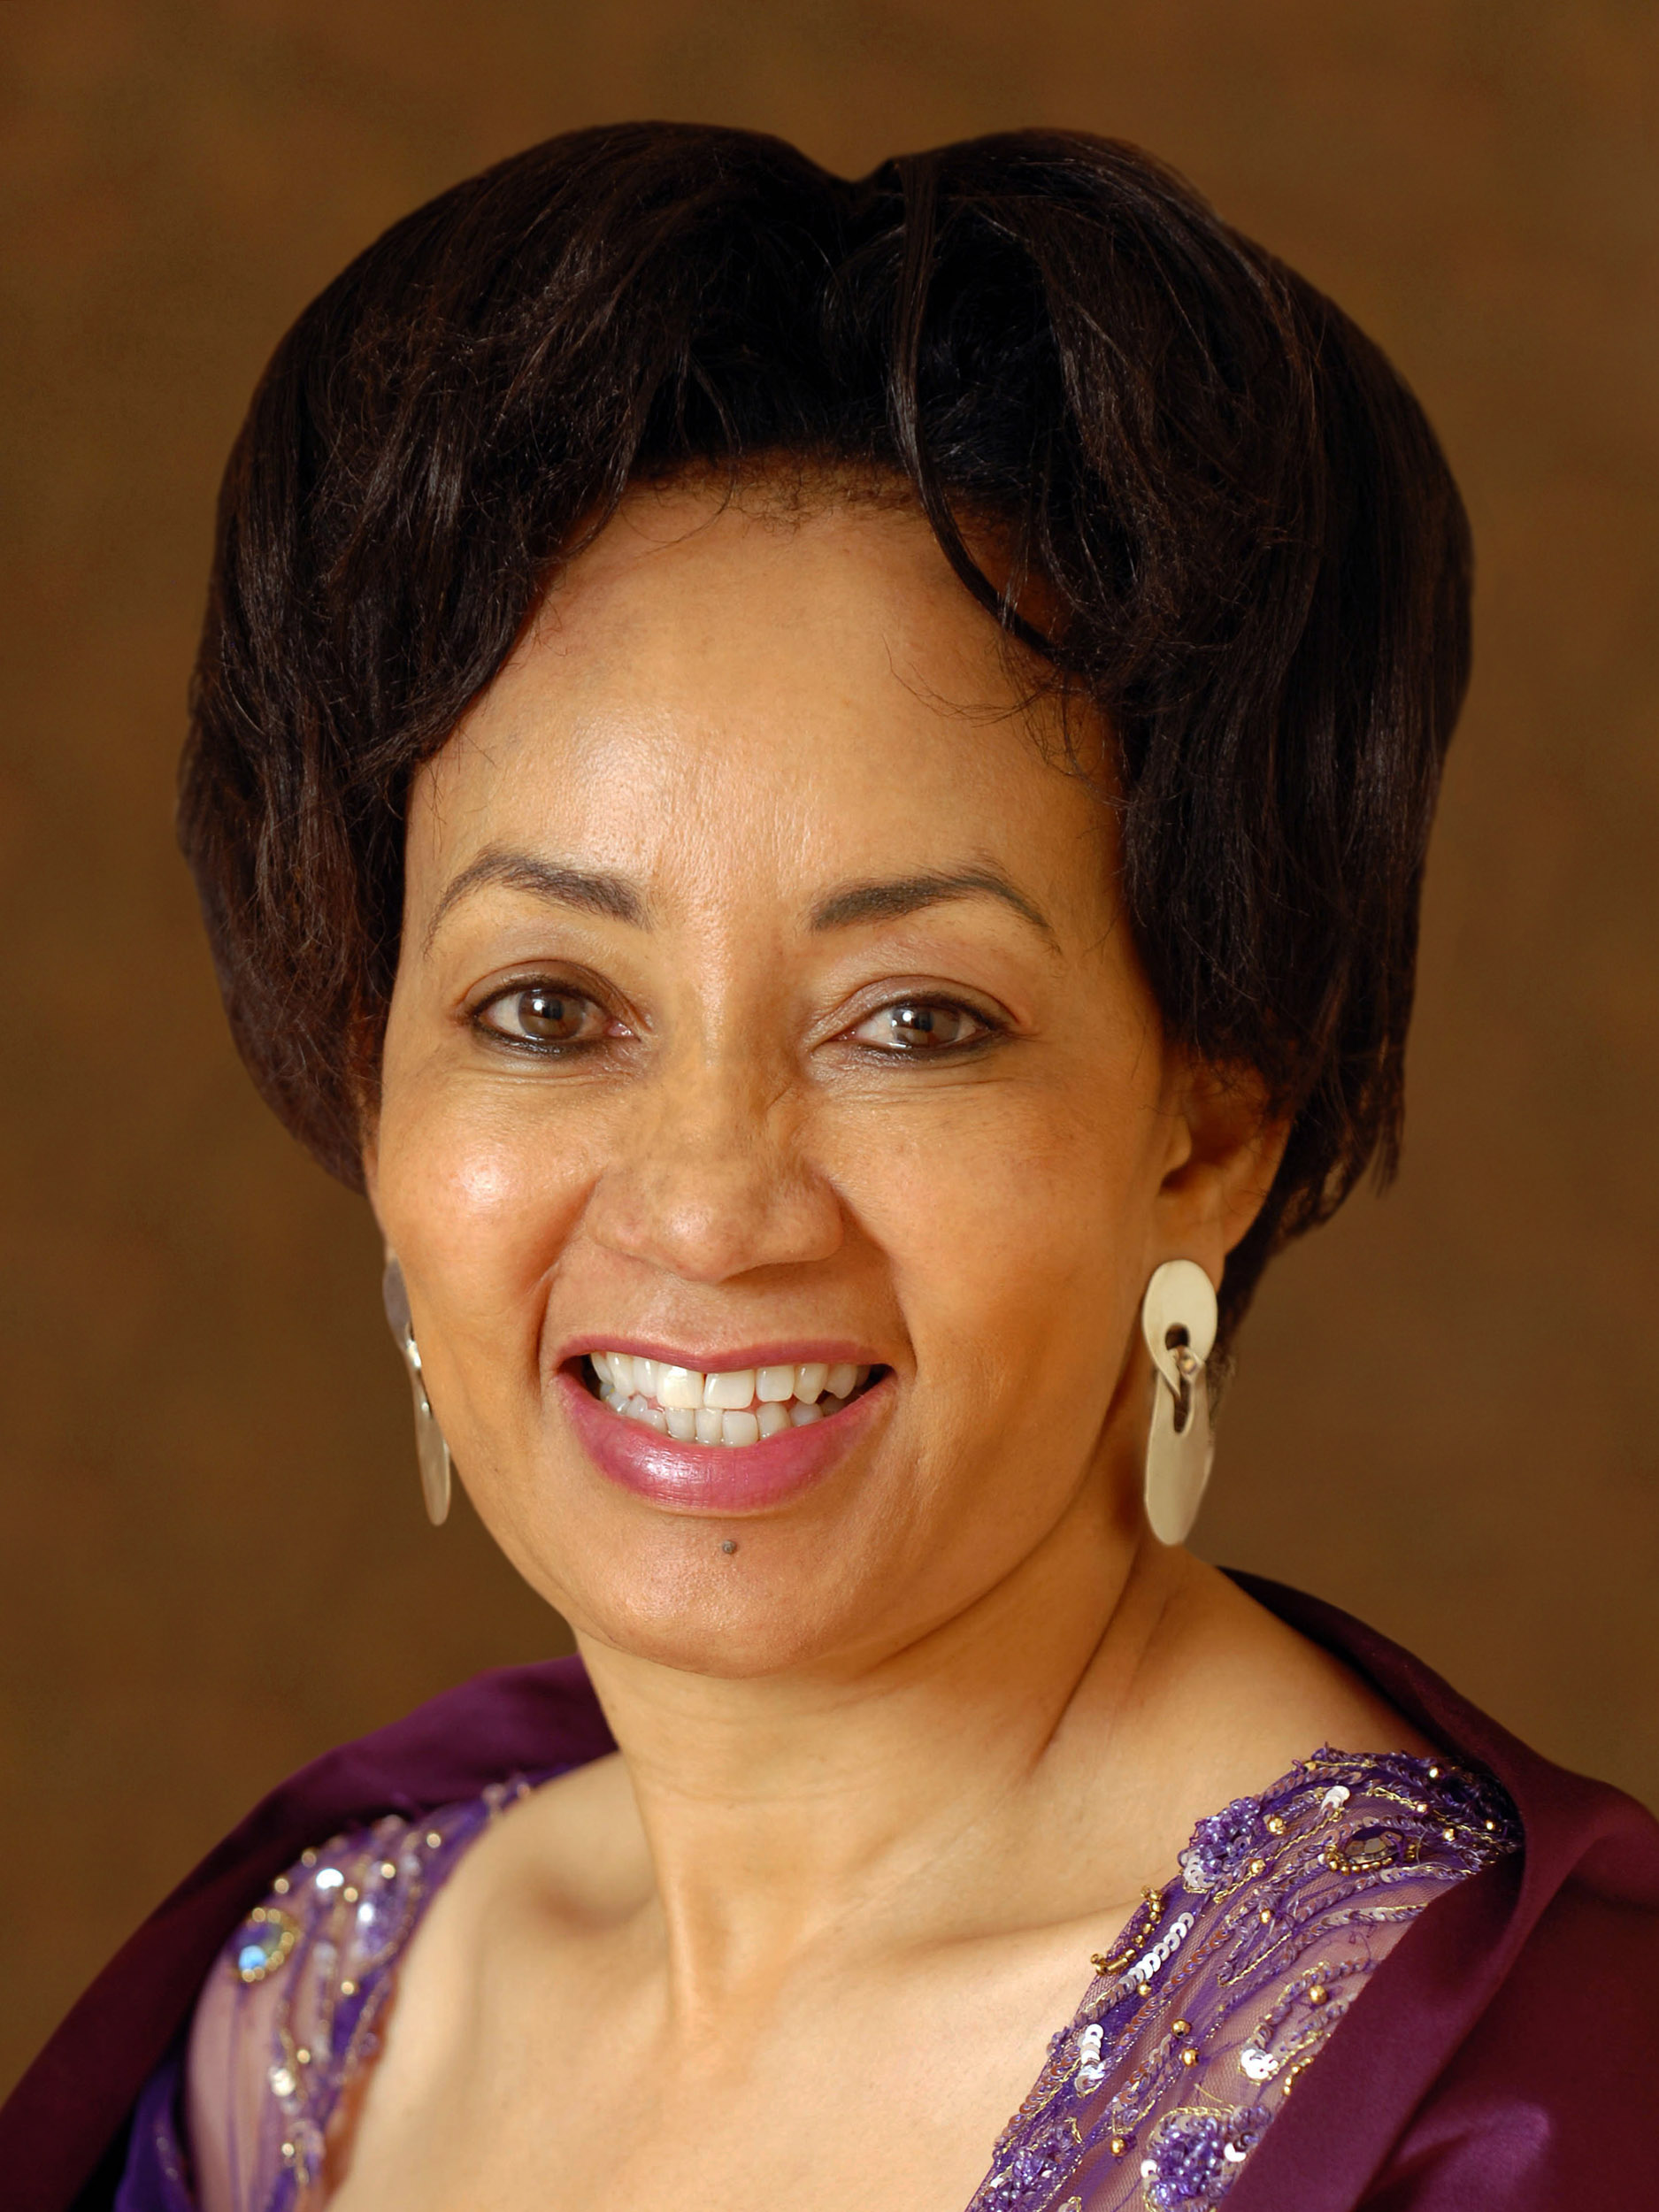 Tourism Minister Lindiwe Sisulu to launch “Live Again” global campaign